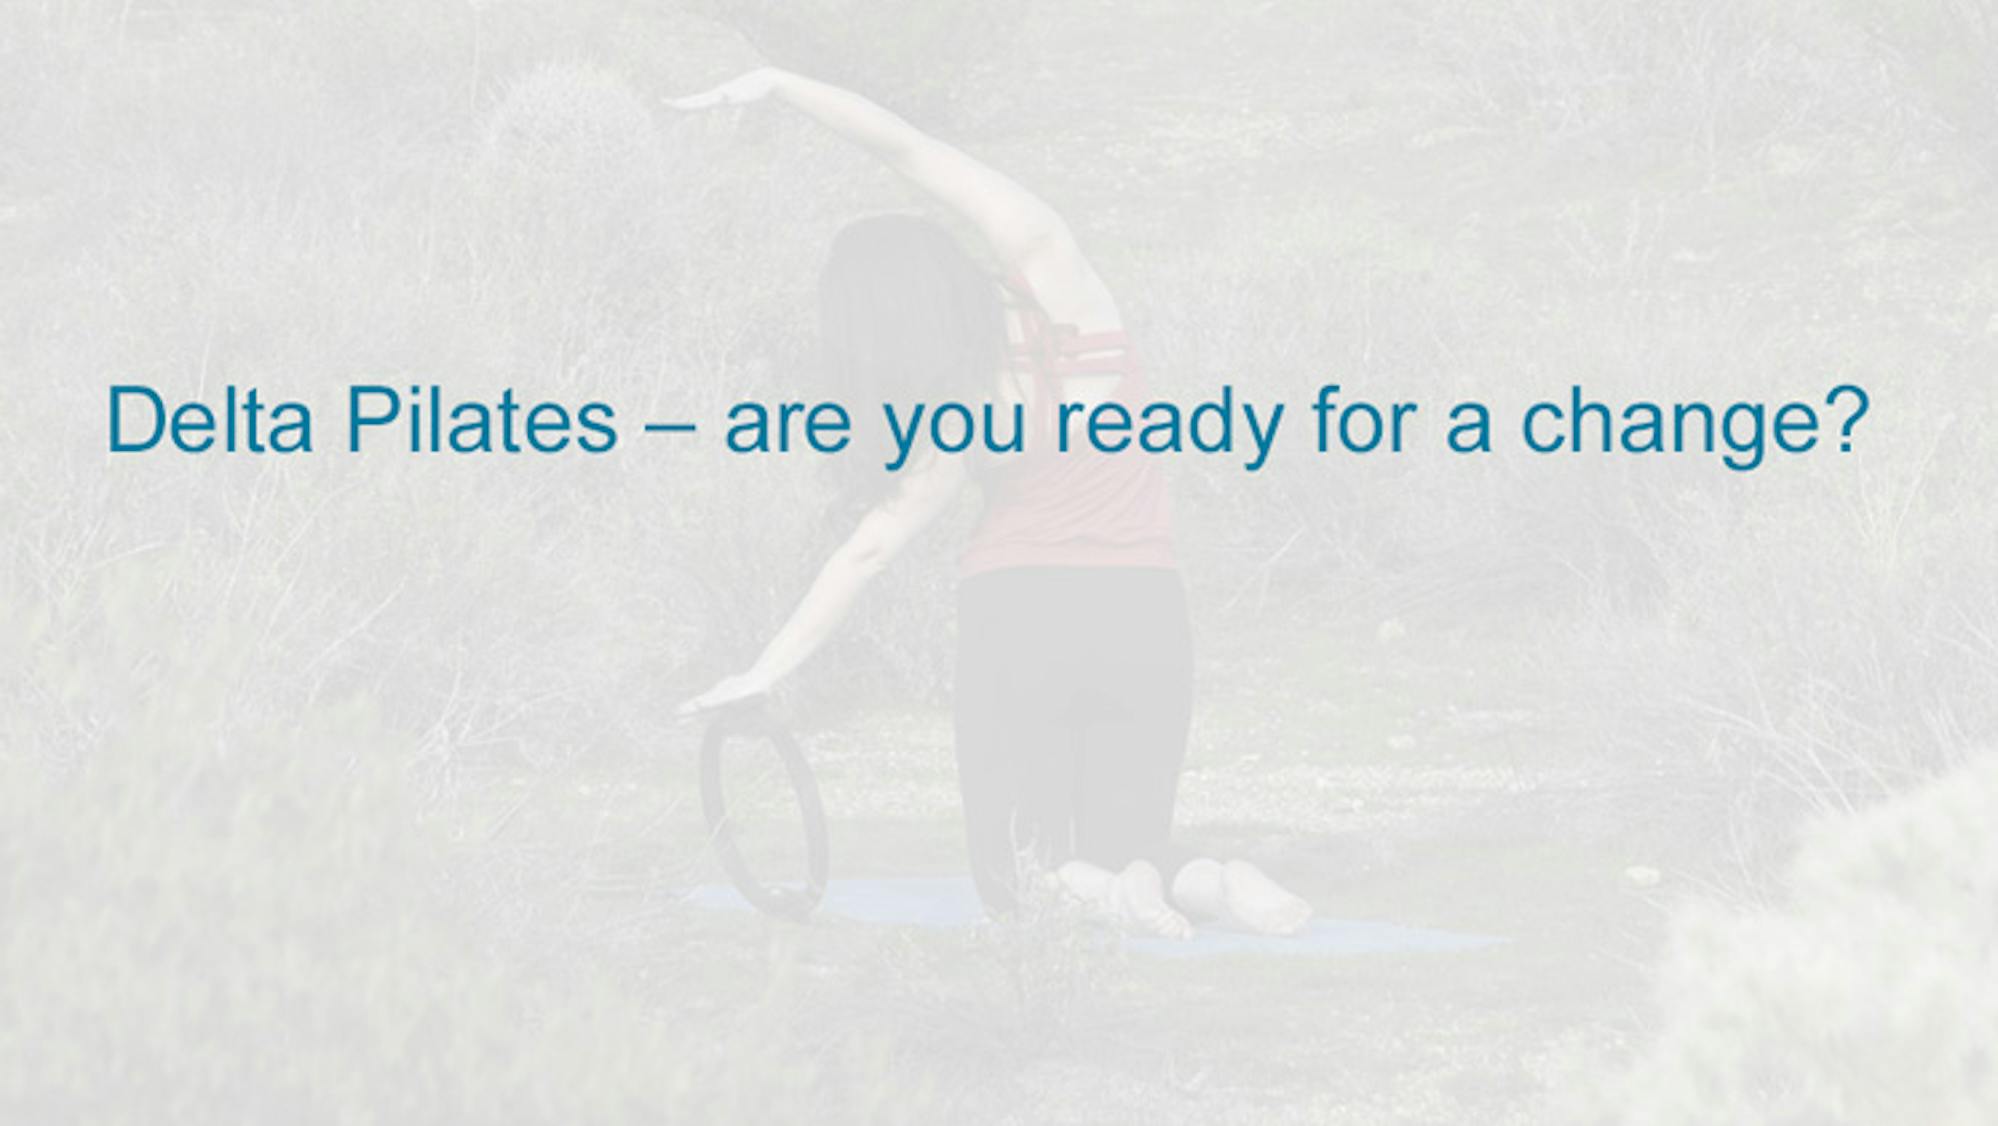 Delta Pilates -- are you ready for a change?